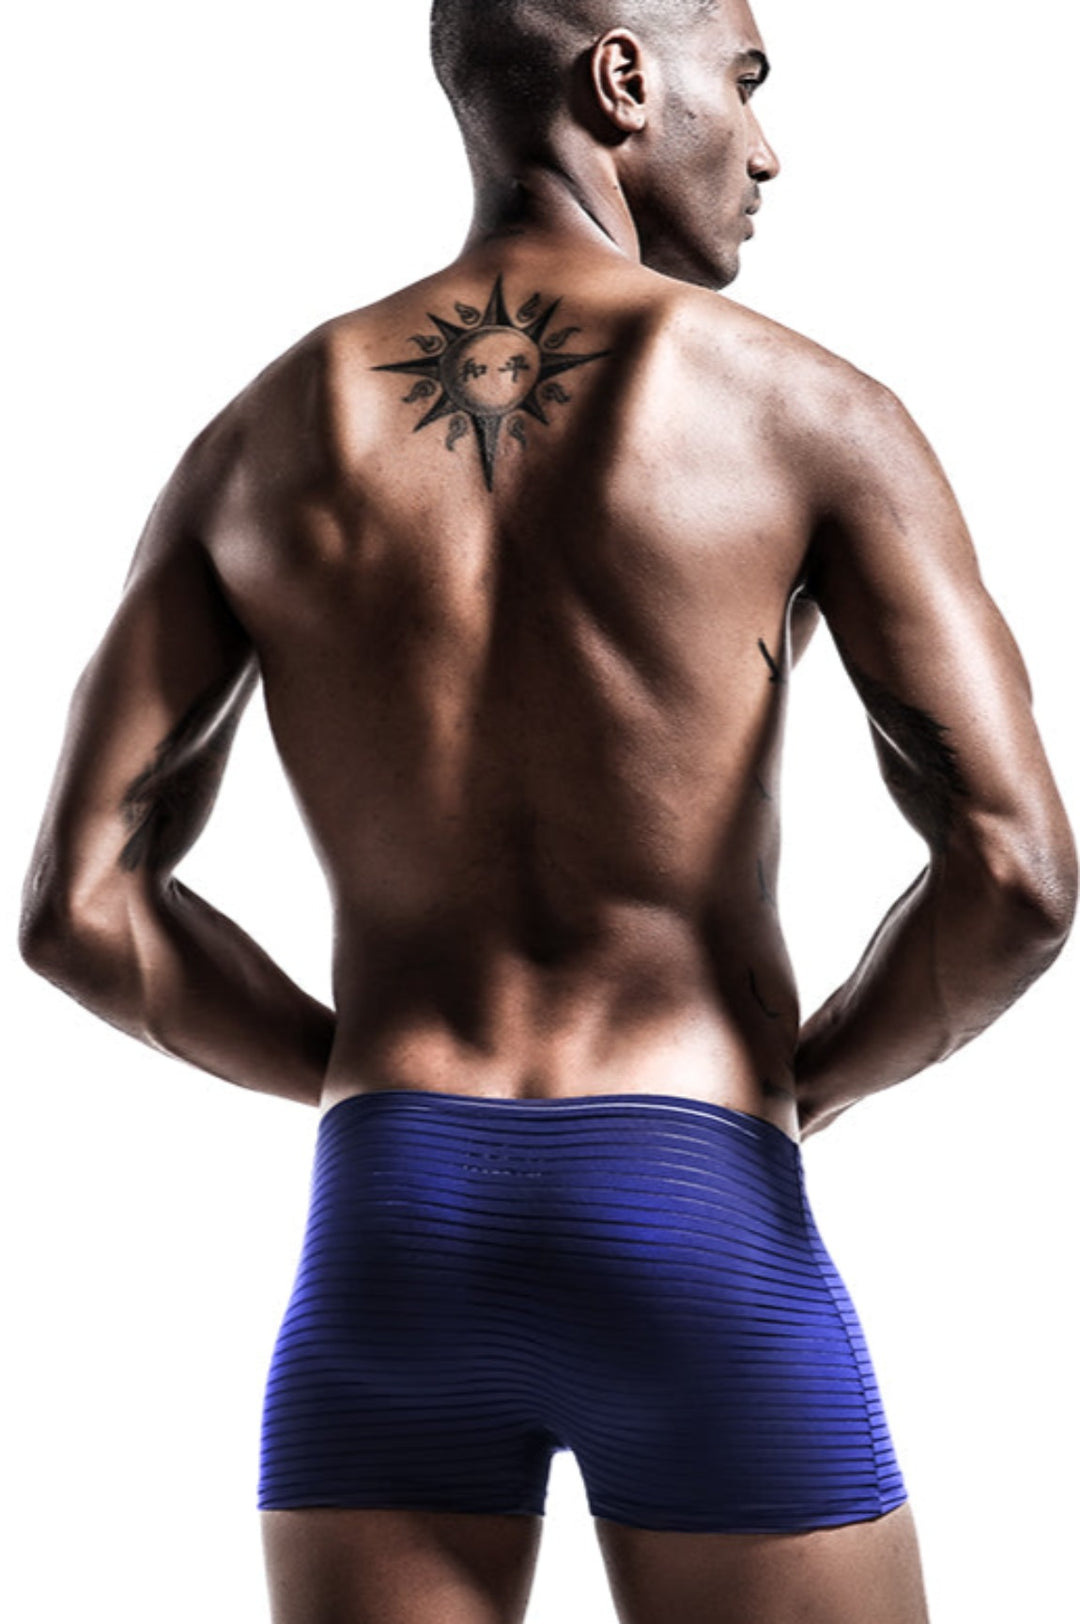 AOELEMENT Low-Rise Trunk Mesh Sport